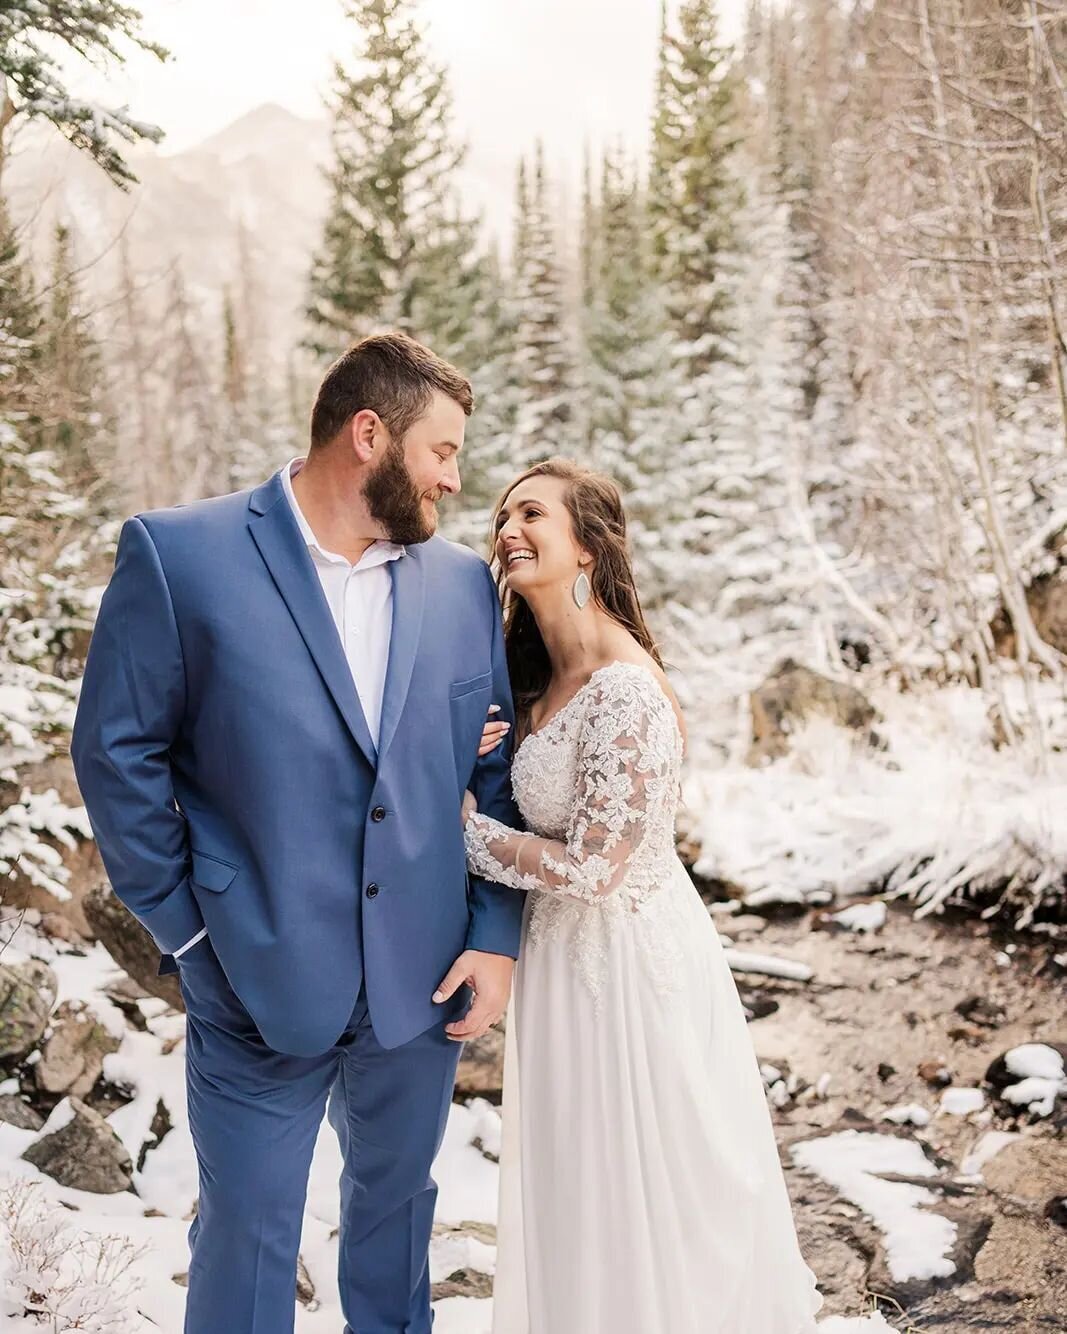 Watch the sun go down over the majestic Colorado mountains as you and your partner exchange your vows in this intimate and romantic elopement captured by Sam Immer Photography.